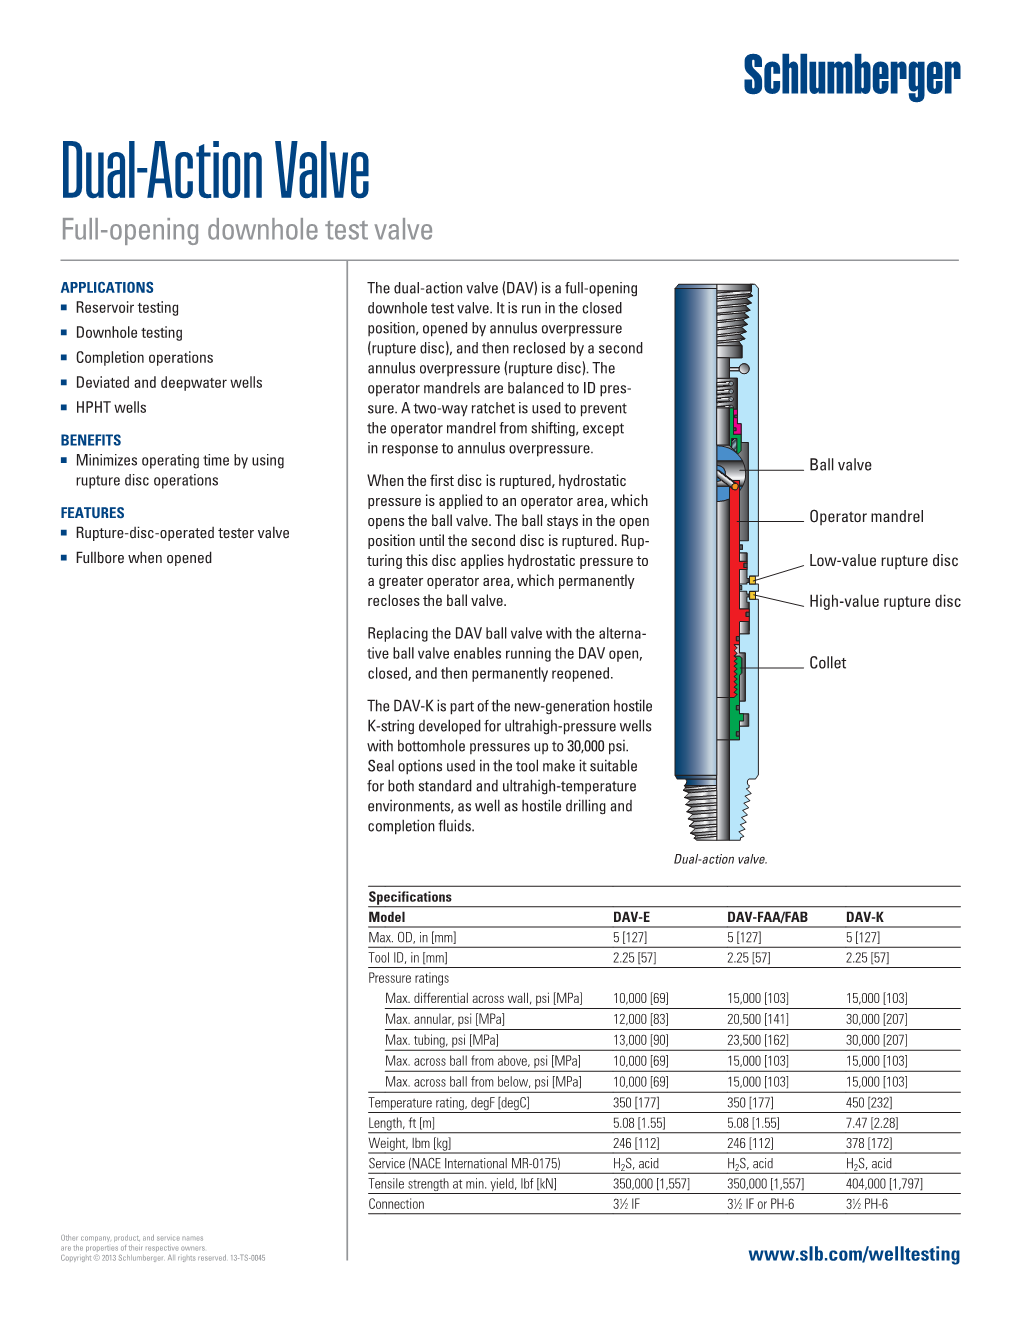 Dual-Action Valve Product Sheet